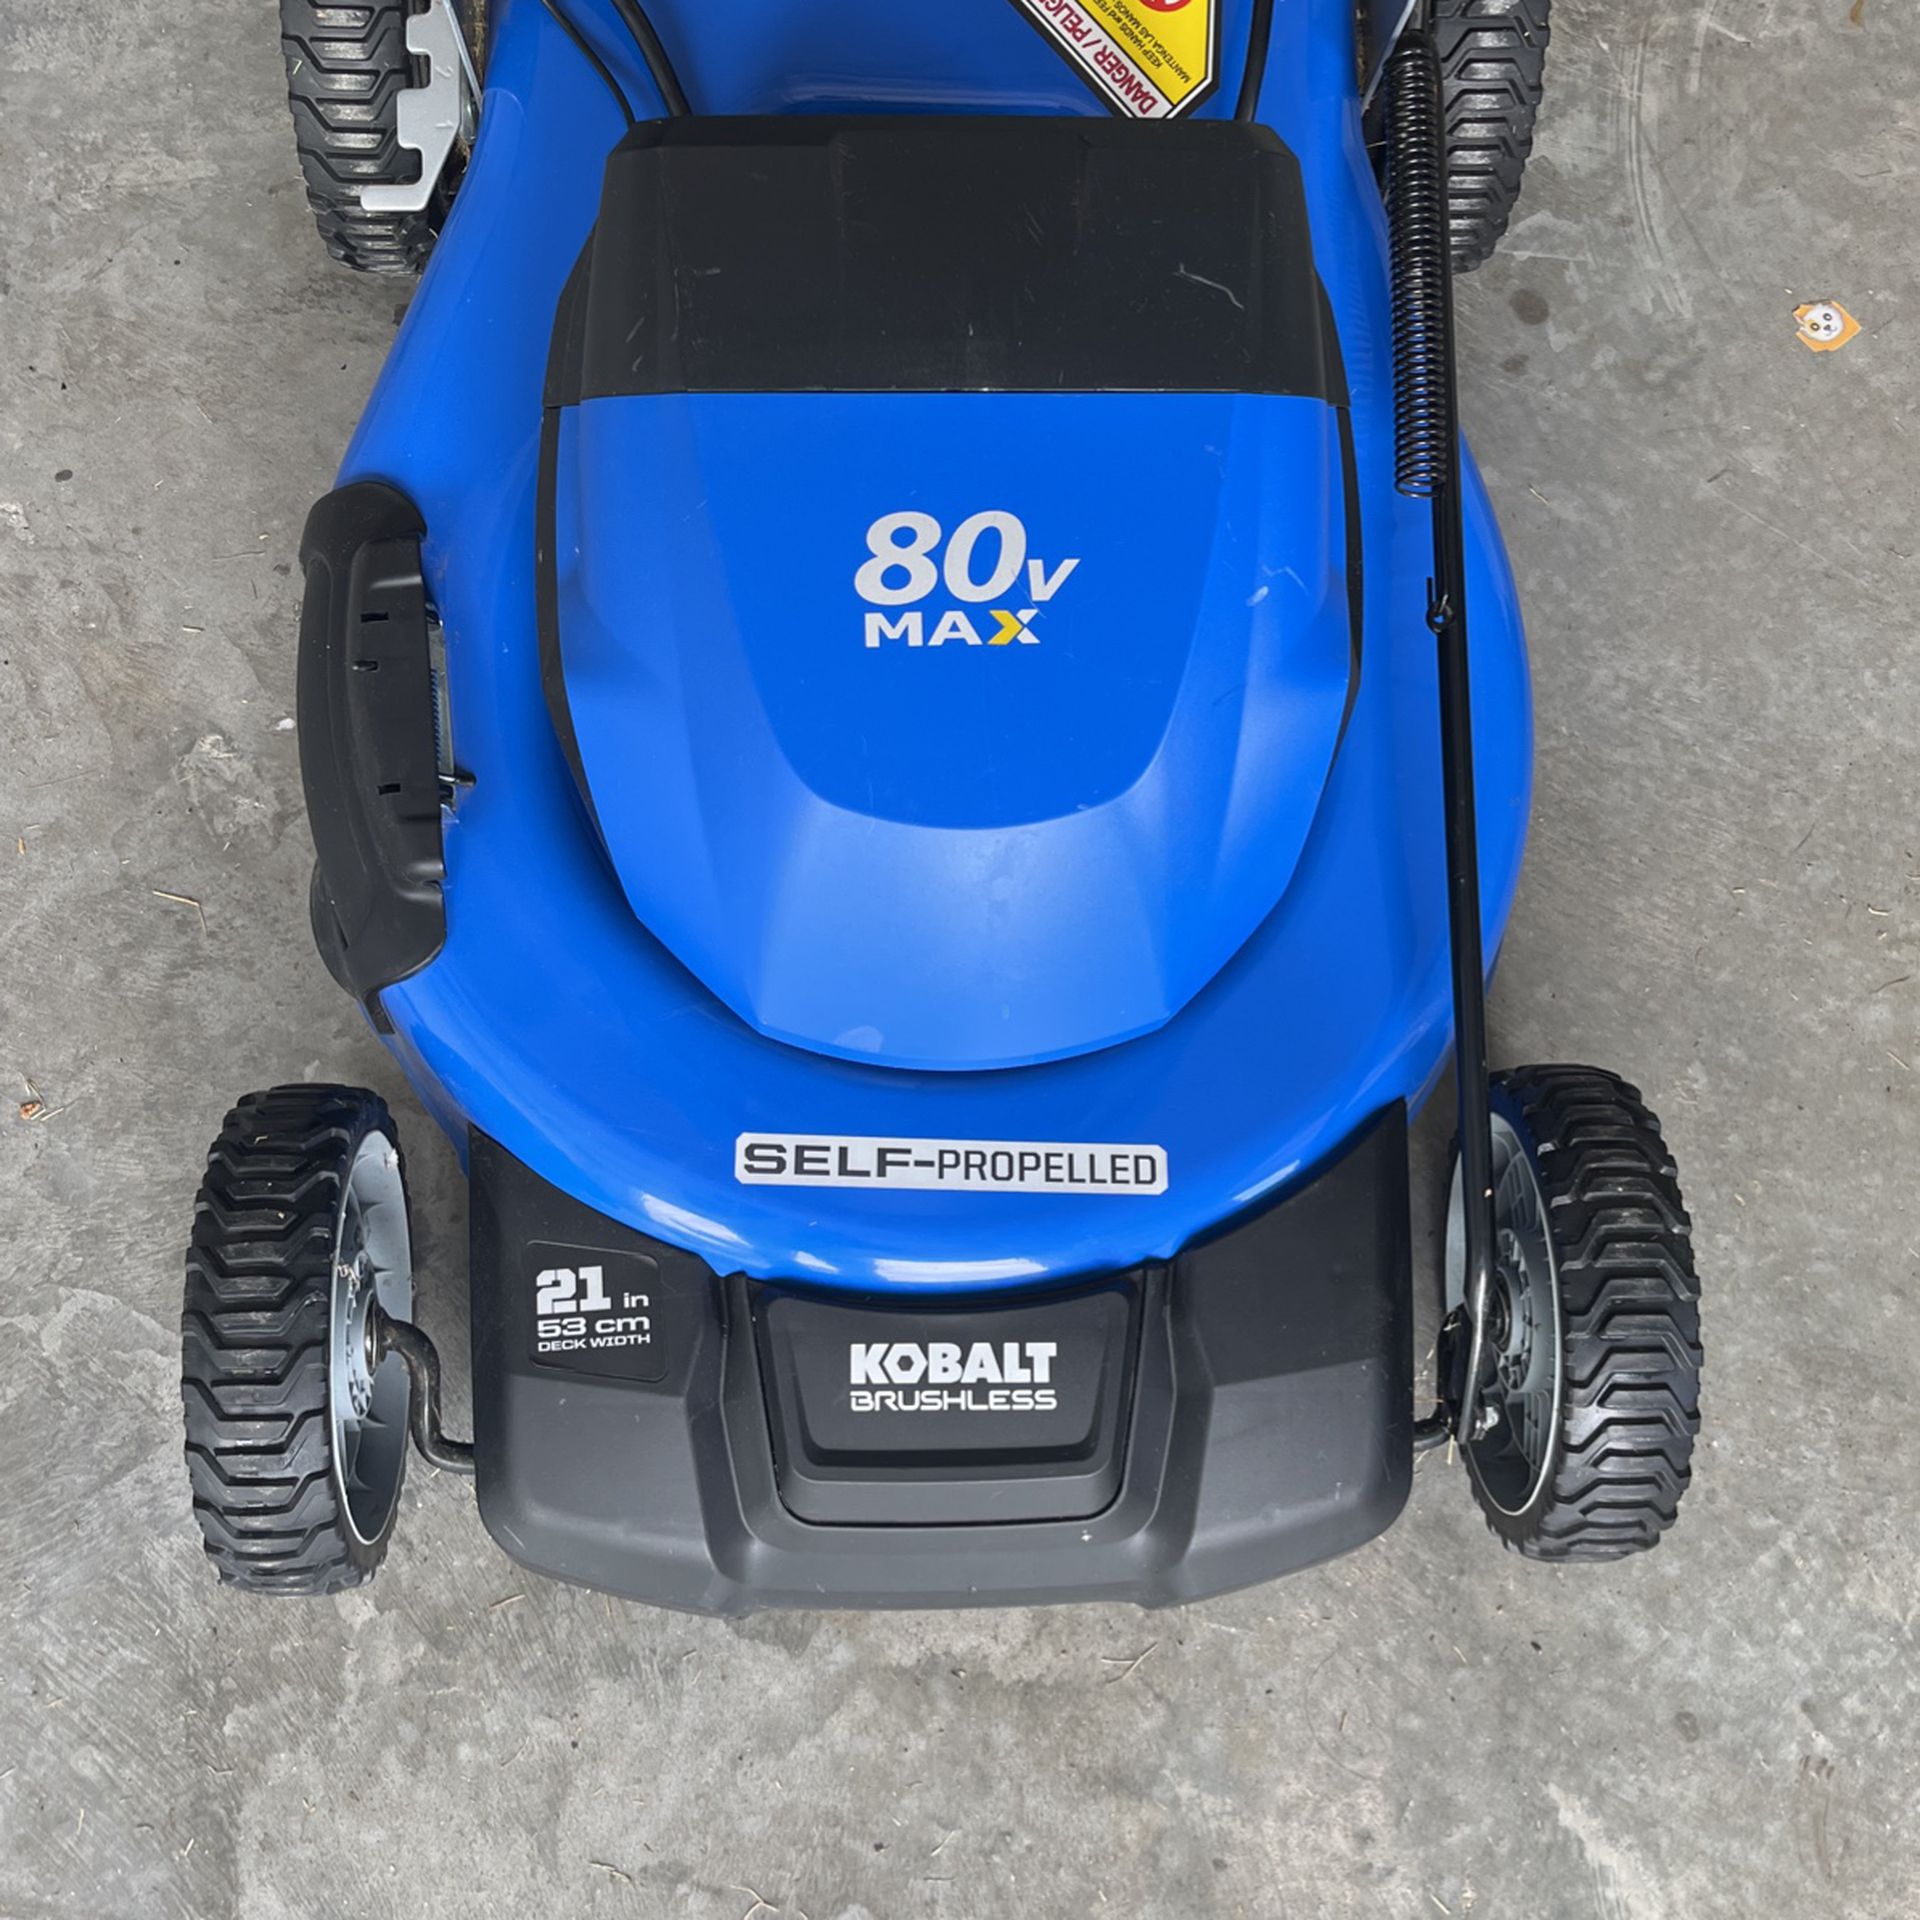 Kobalt 80-volt 21-in Cordless Self-propelled Lawn Mower 6 Ah (1-Battery and Charger Included)